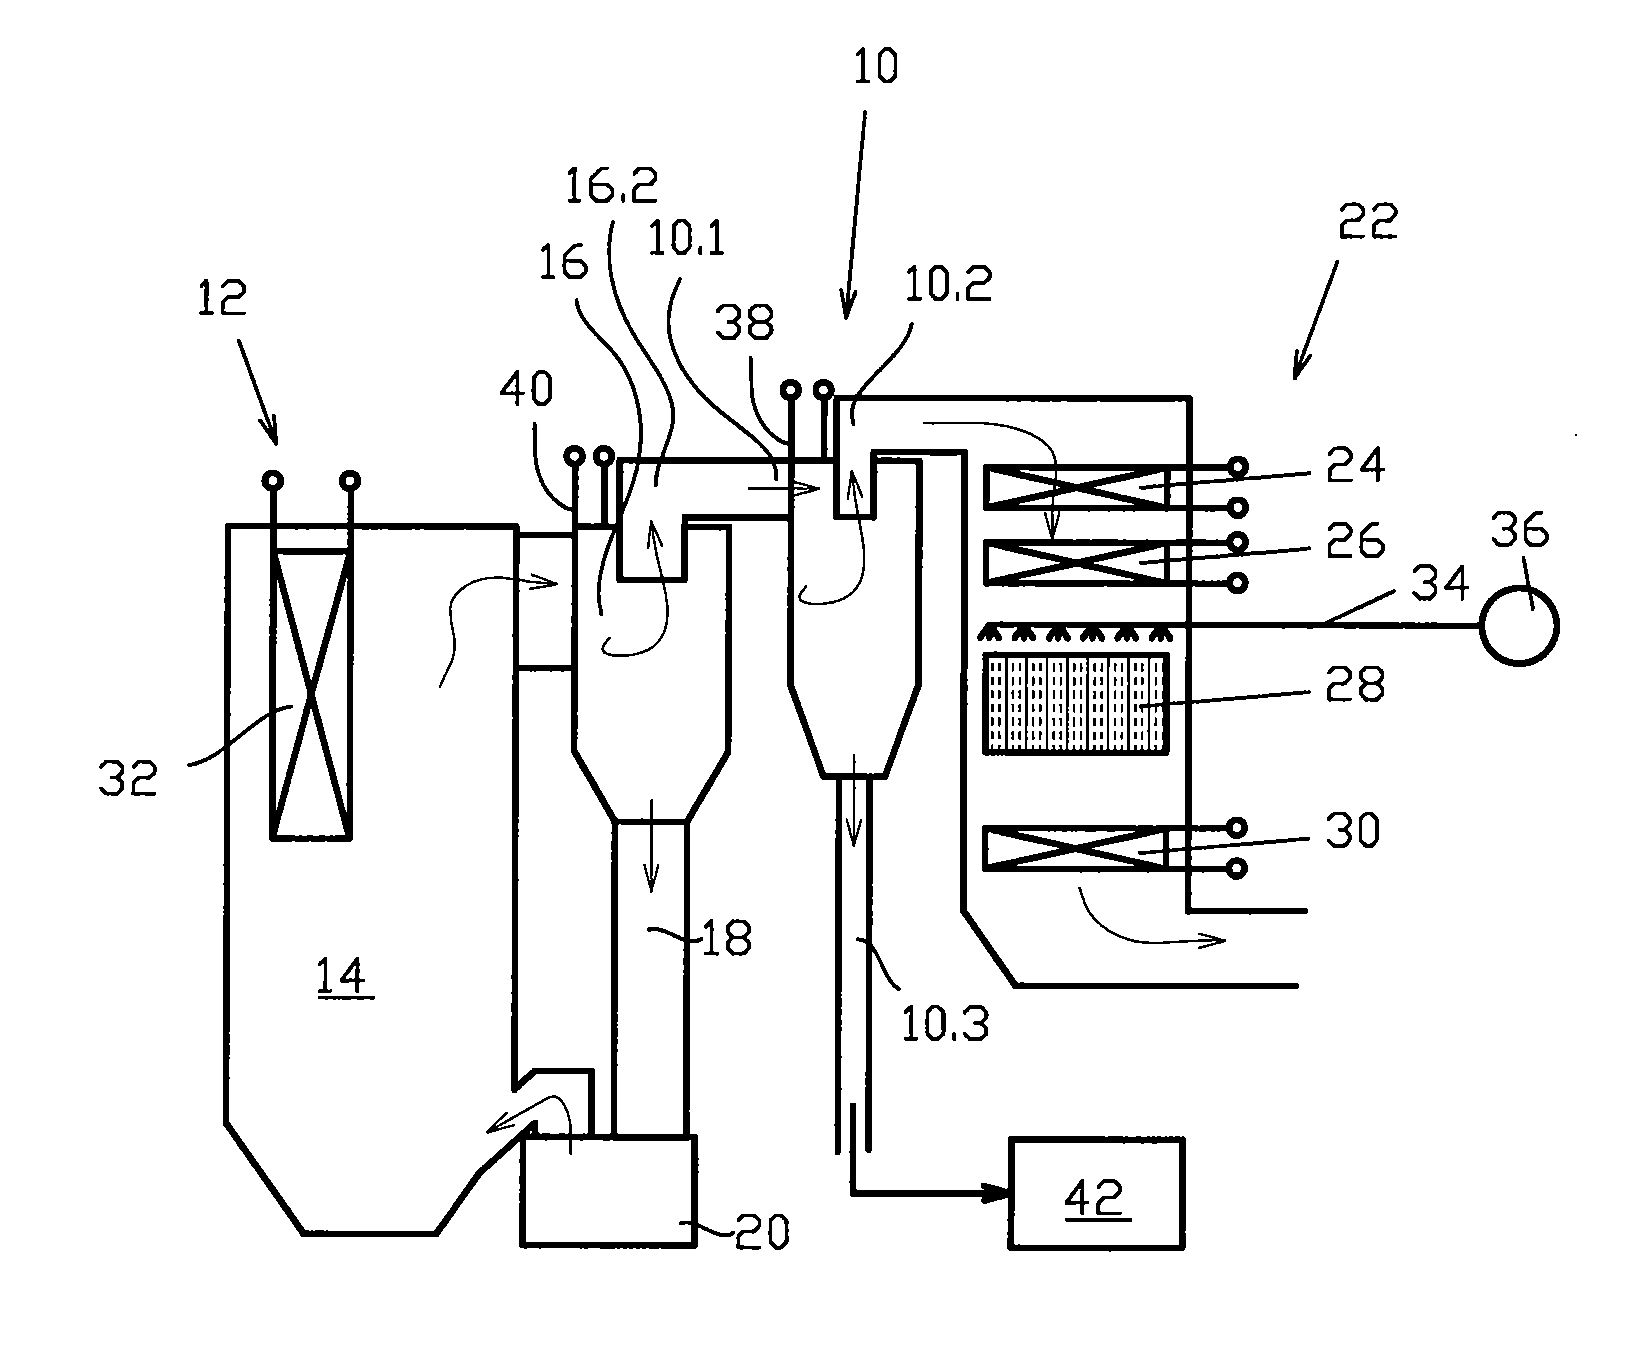 Circulating Fluidized Bed Combustor and a Method of Operating a Circulating Fluidized Bed Combustor